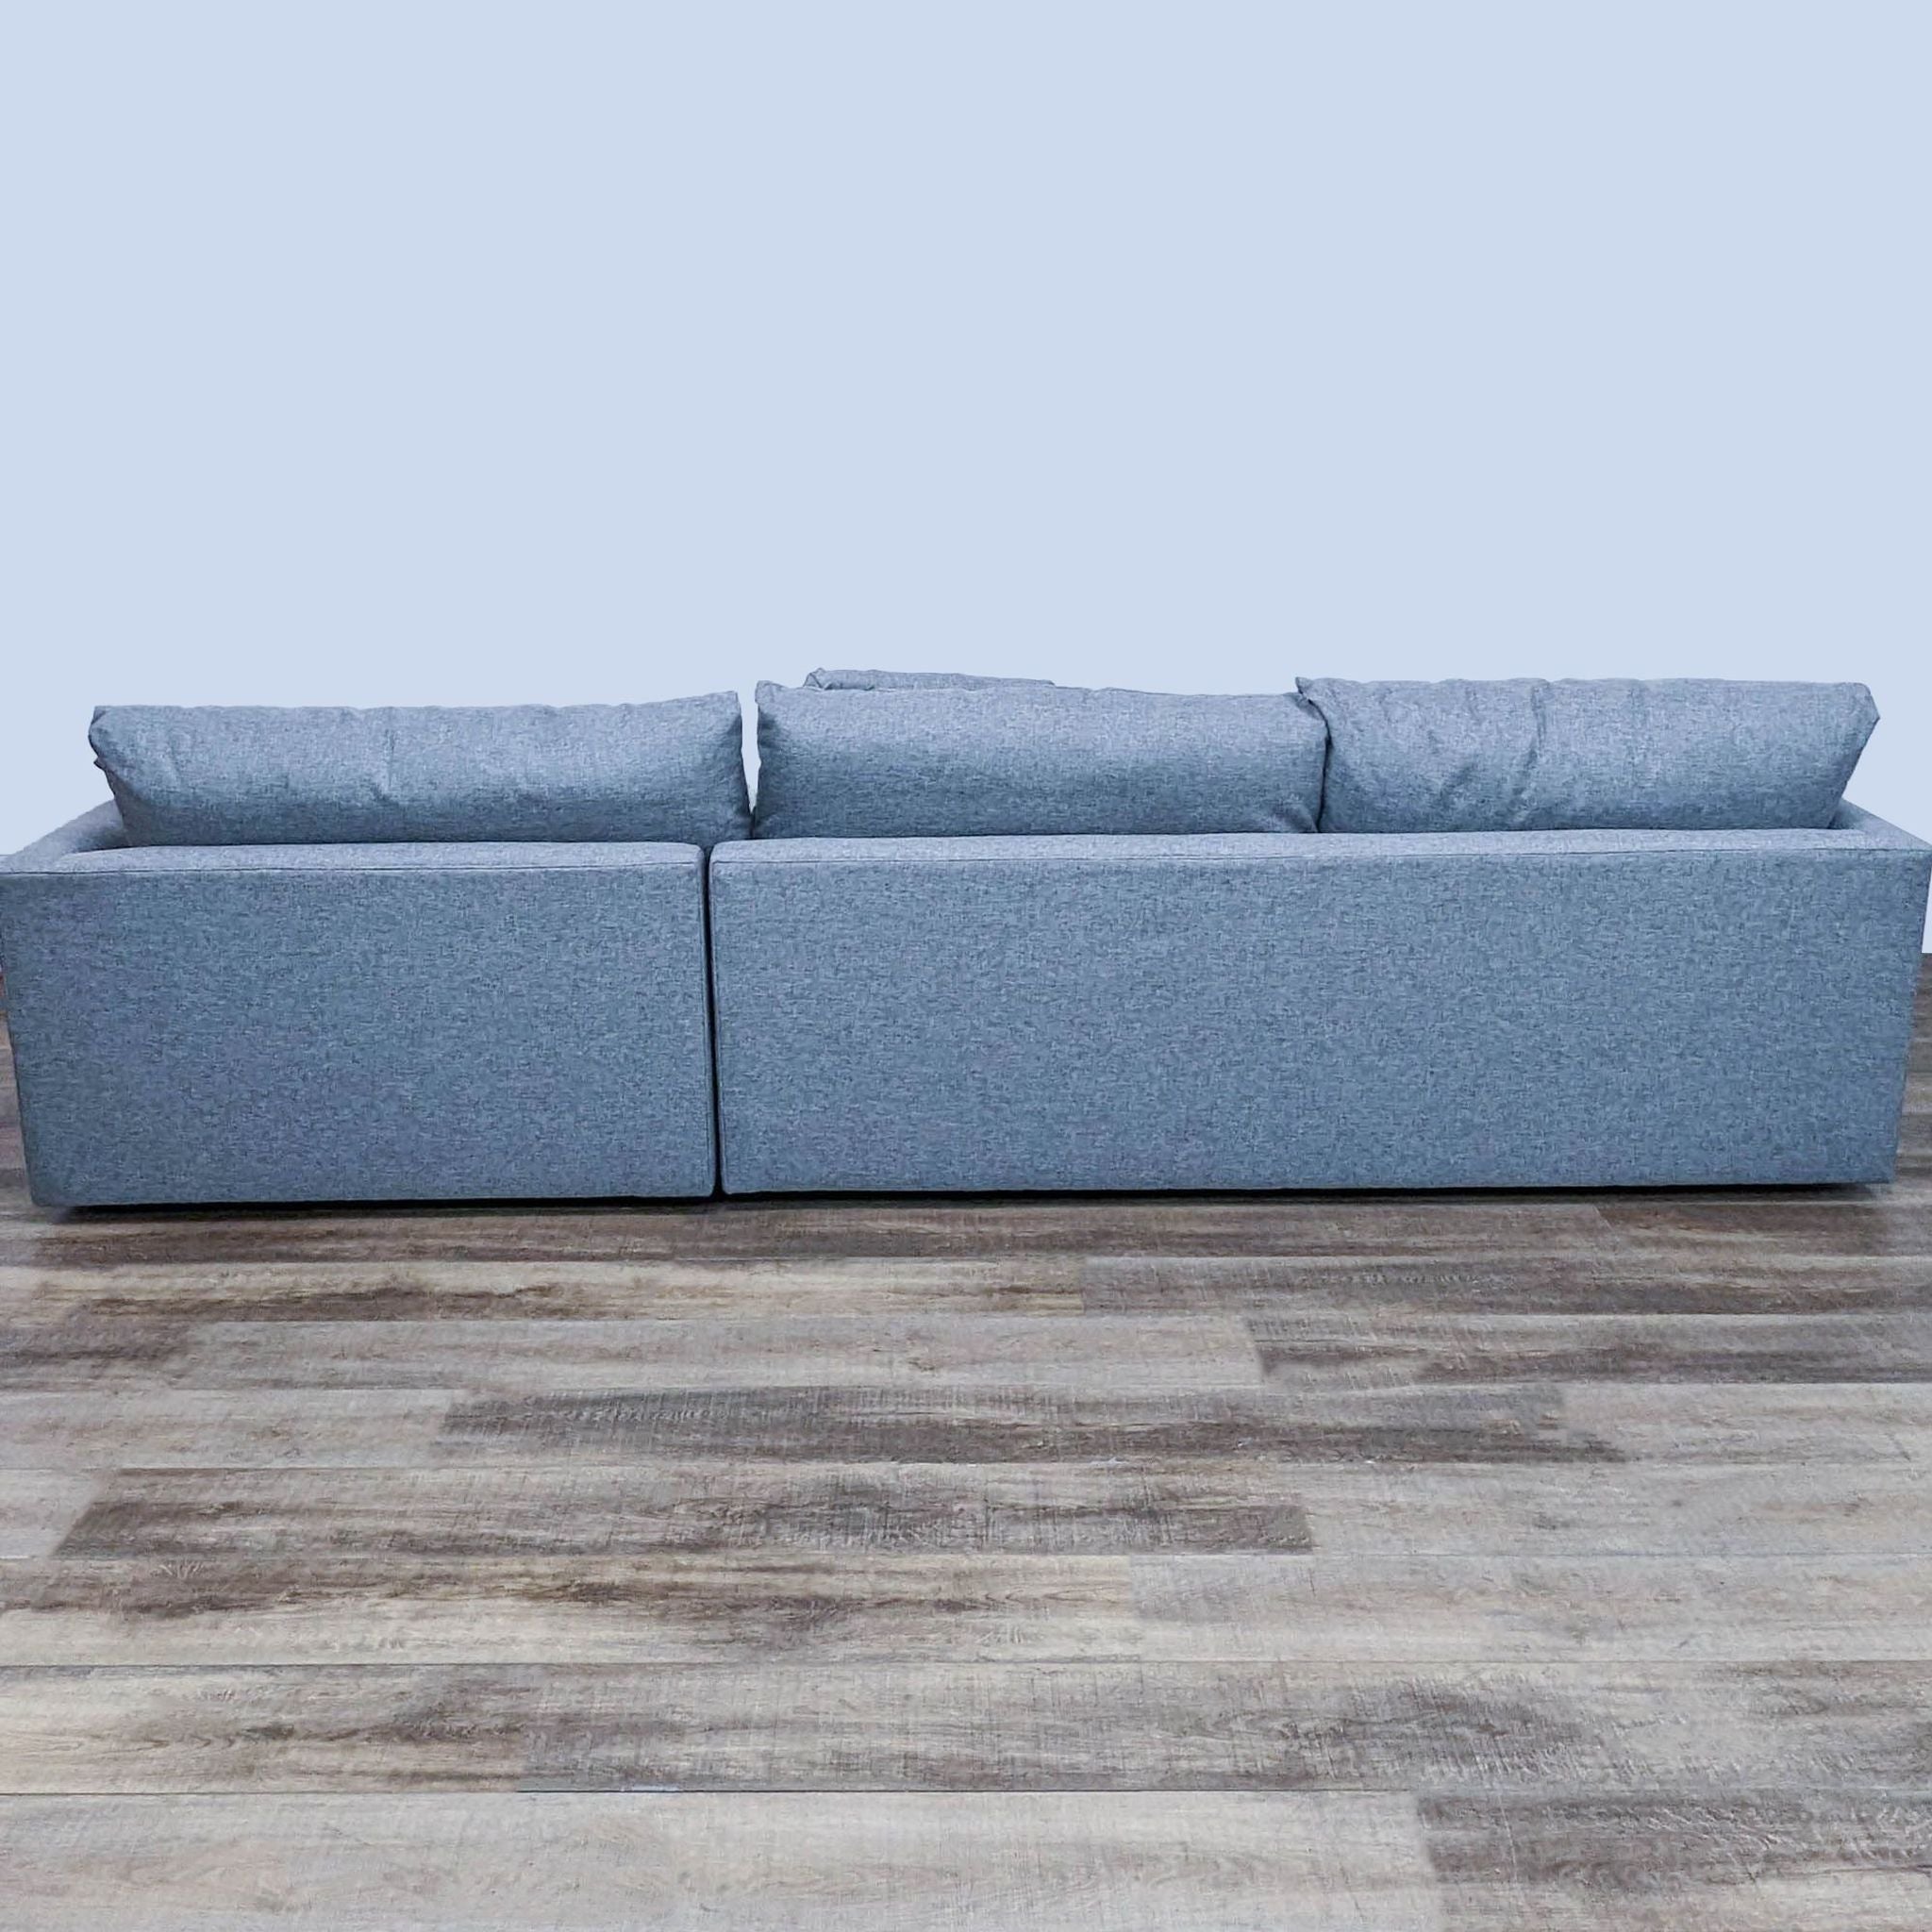 Crate & Barrel gray sectional sofa on a wooden floor with a simple, modern design.